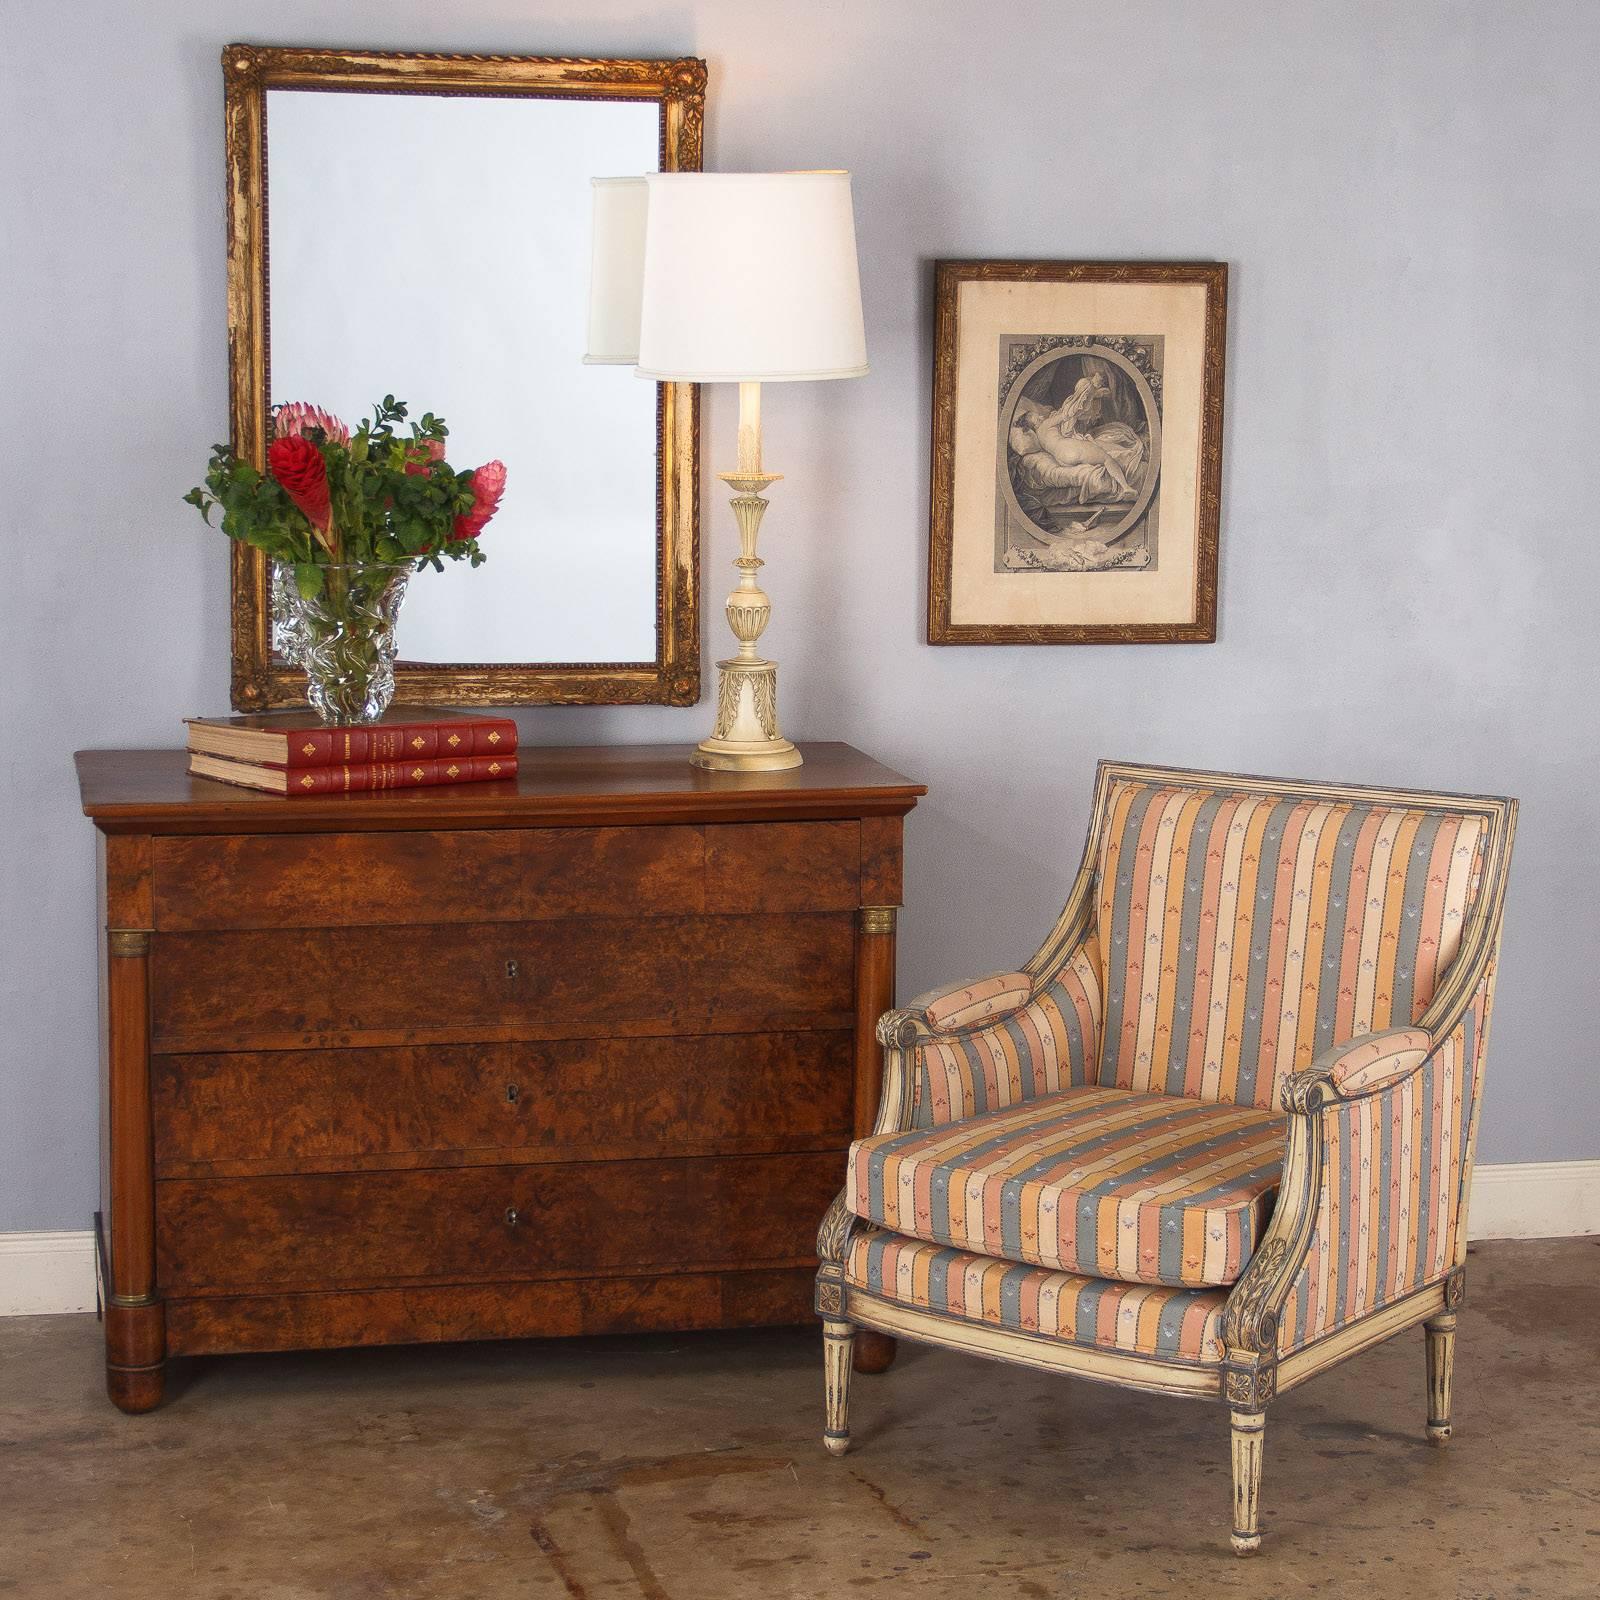 This classic French Empire period commode features a gorgeous burl walnut facade and elegant bronze ornaments on the columns framing the chest. With four drawers, the top and sides are made of solid walnut. An absolutely stunning chest that will